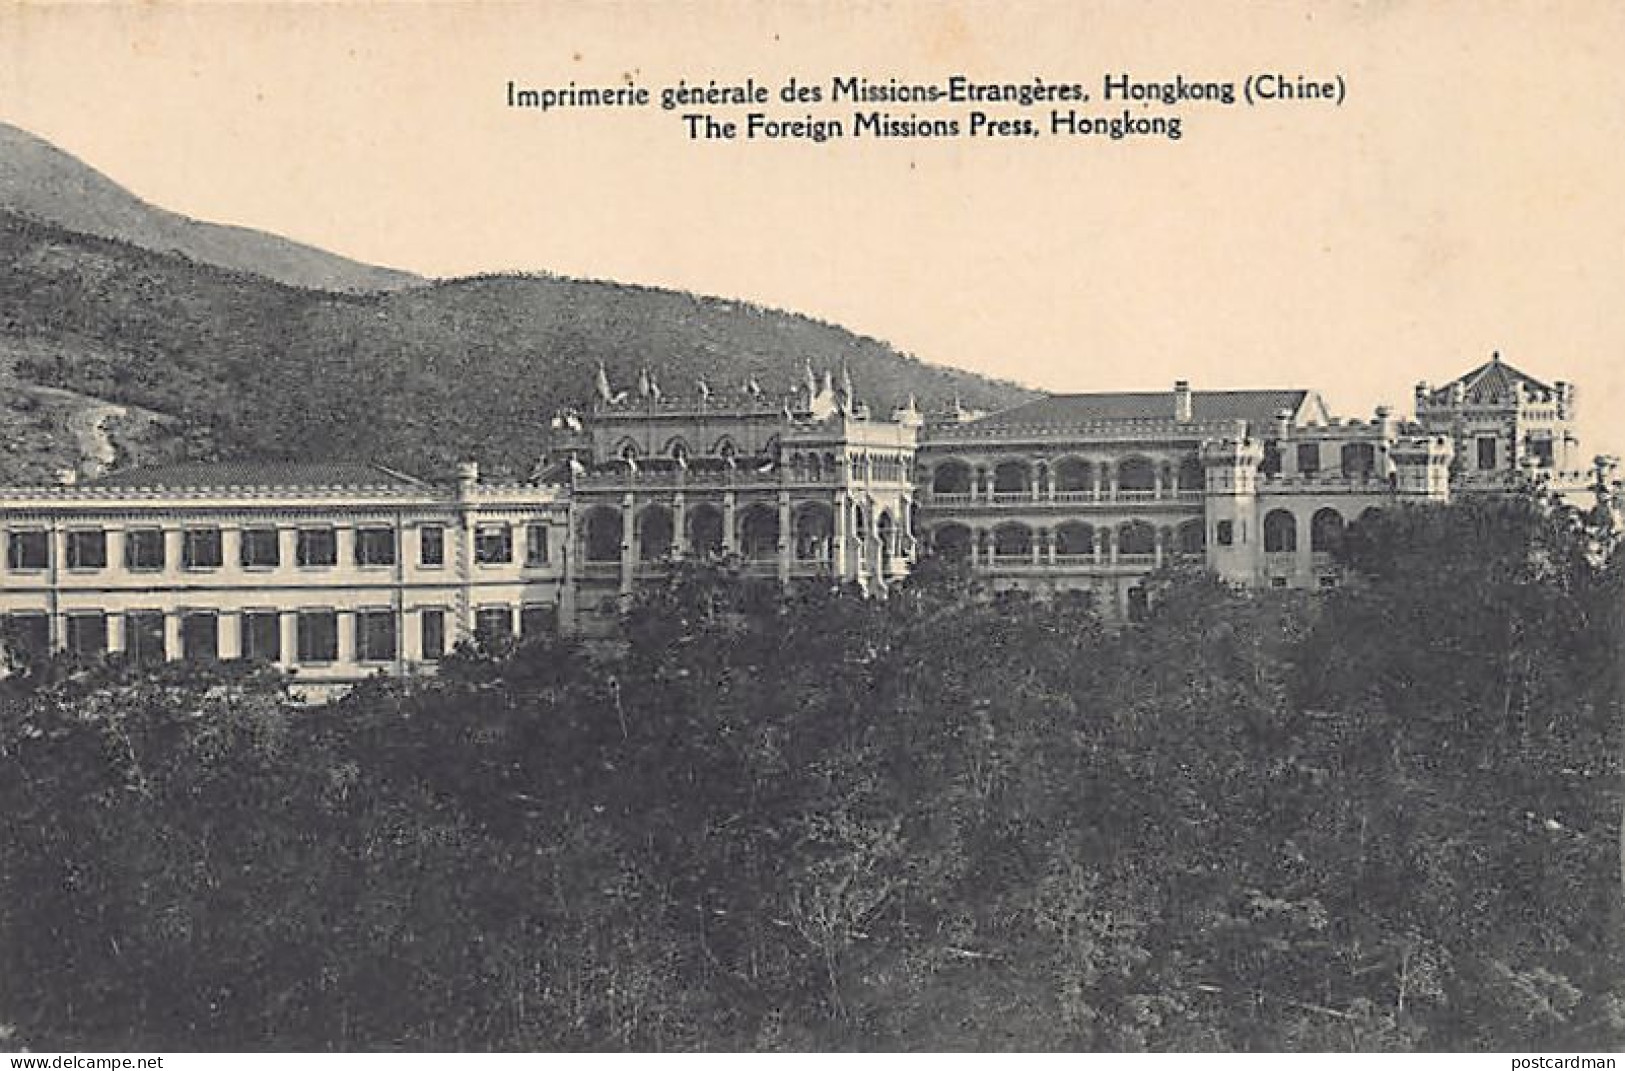 China - HONG KONG - The Printing Works Of The Foreign Missions Of Paris (France) - Publ. Missions Etrangères De Paris  - Chine (Hong Kong)